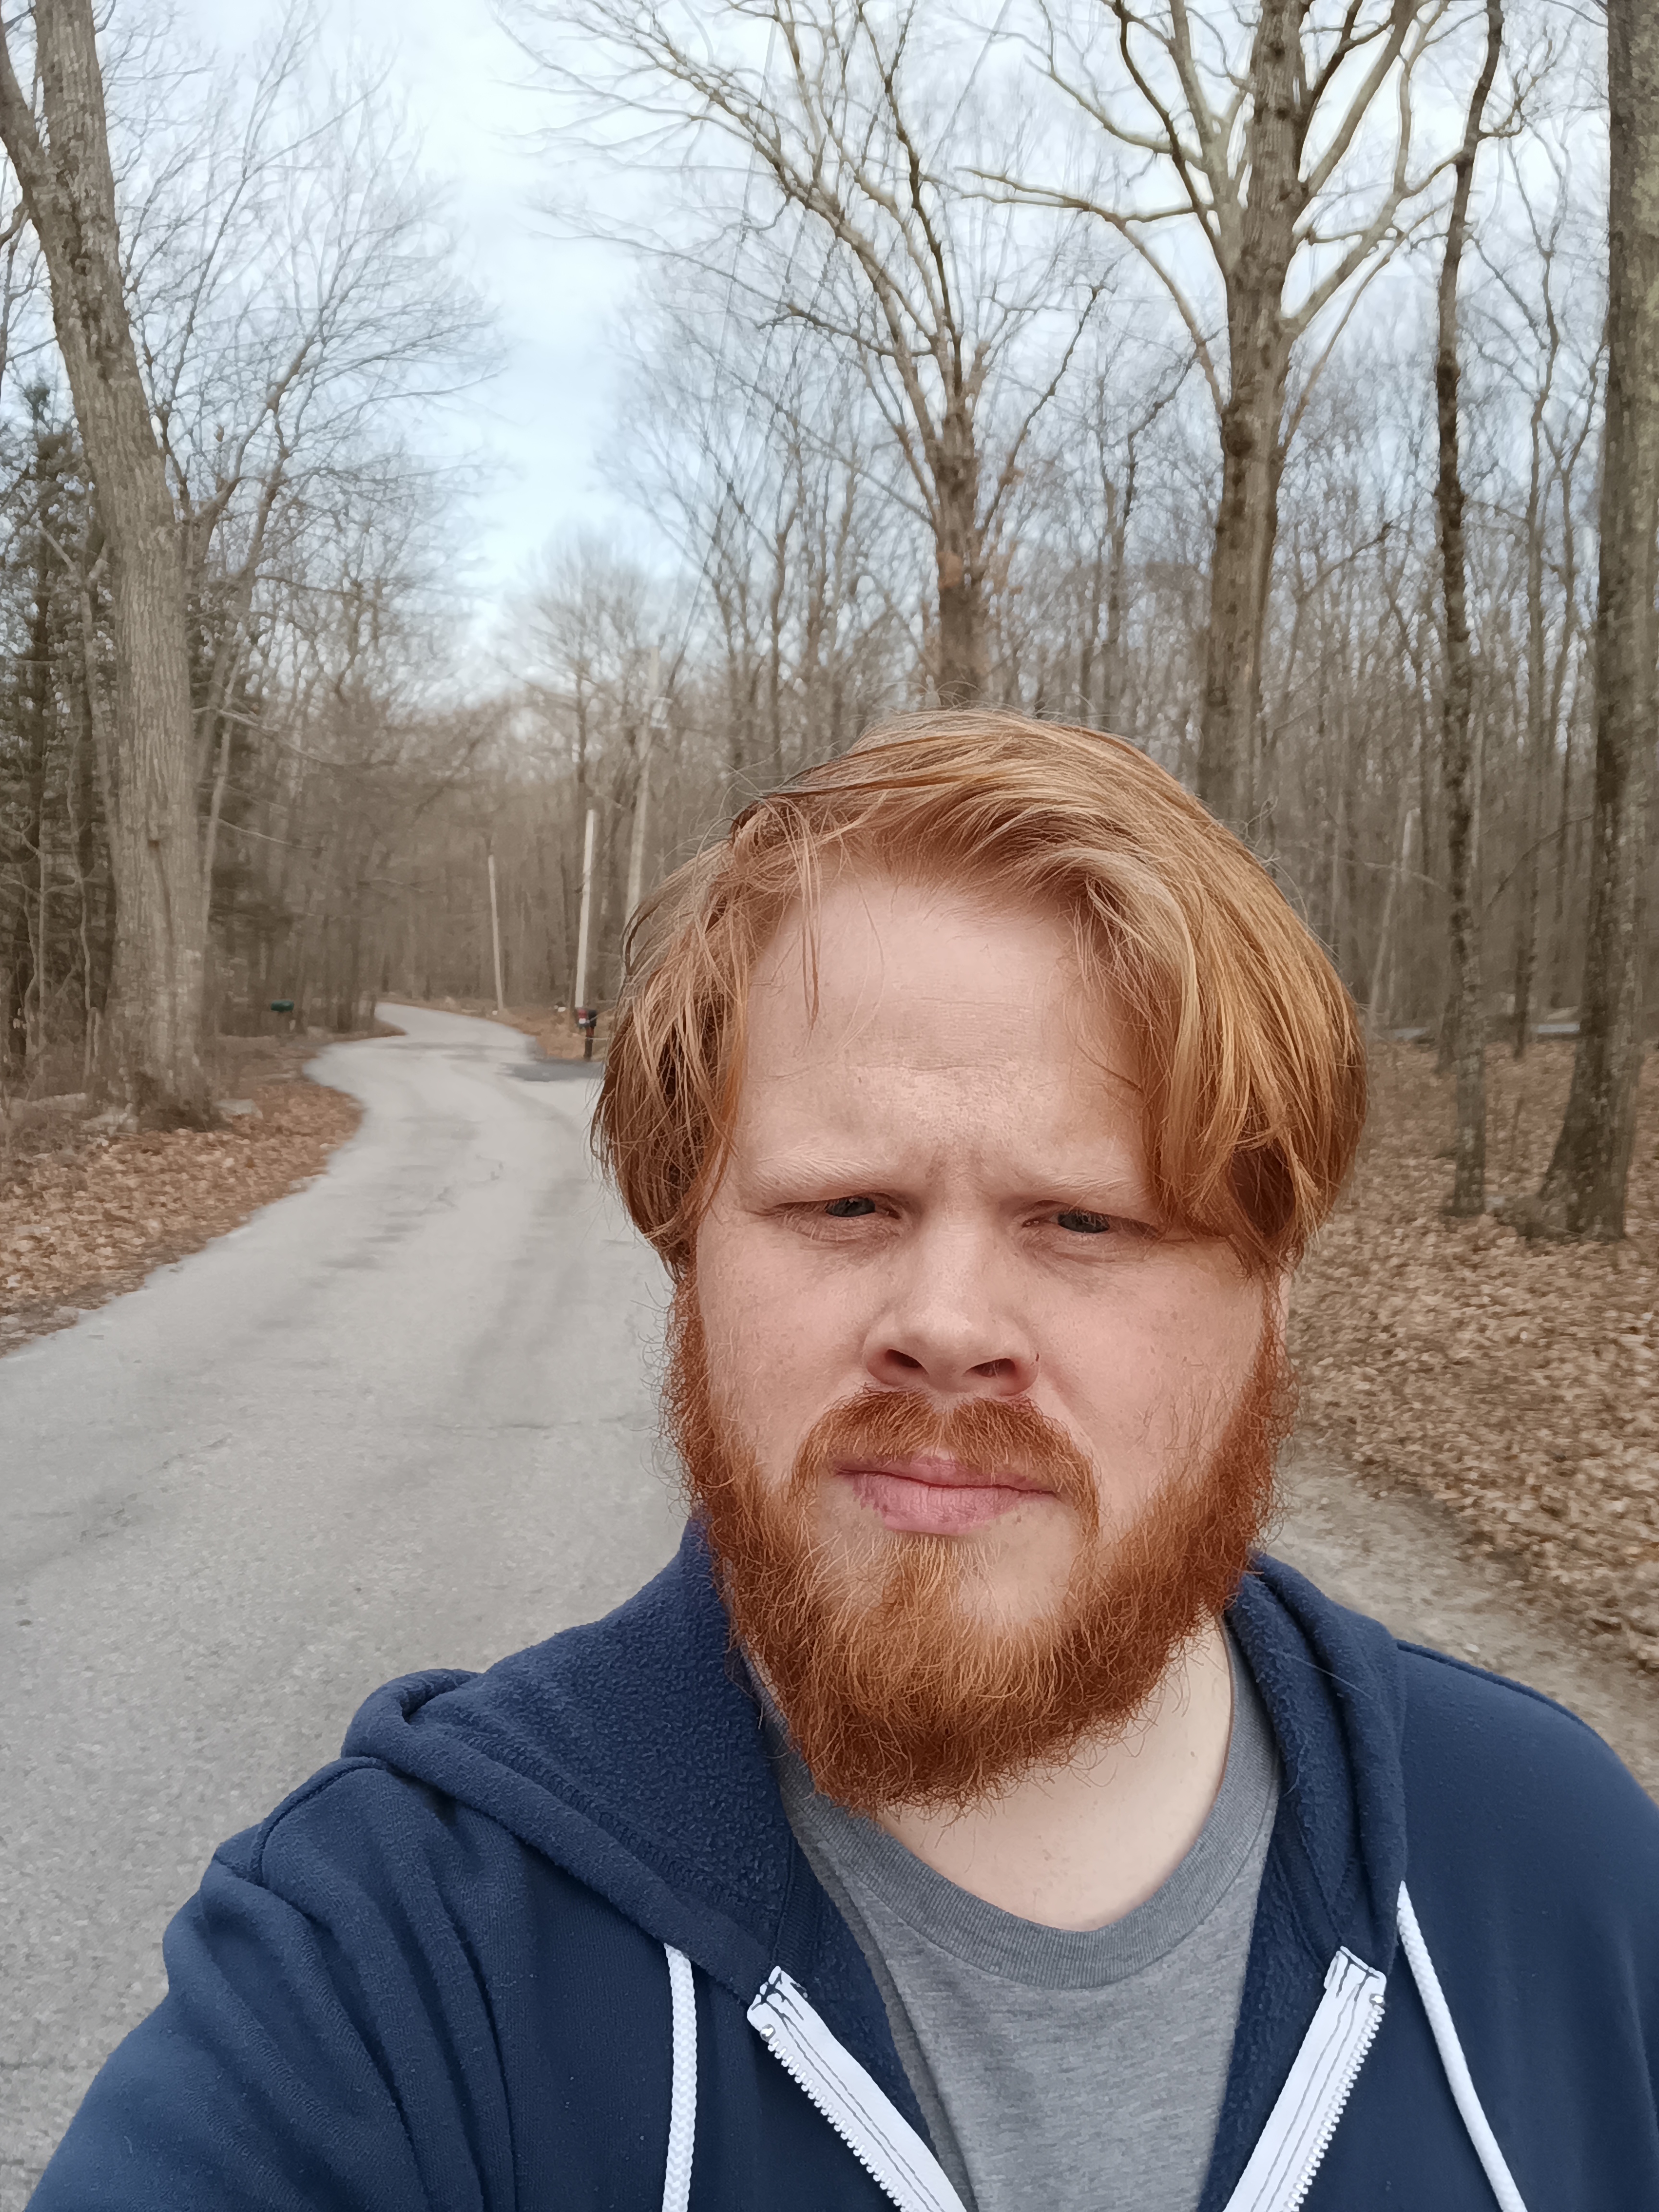 Selfie of a man on a road in the woods